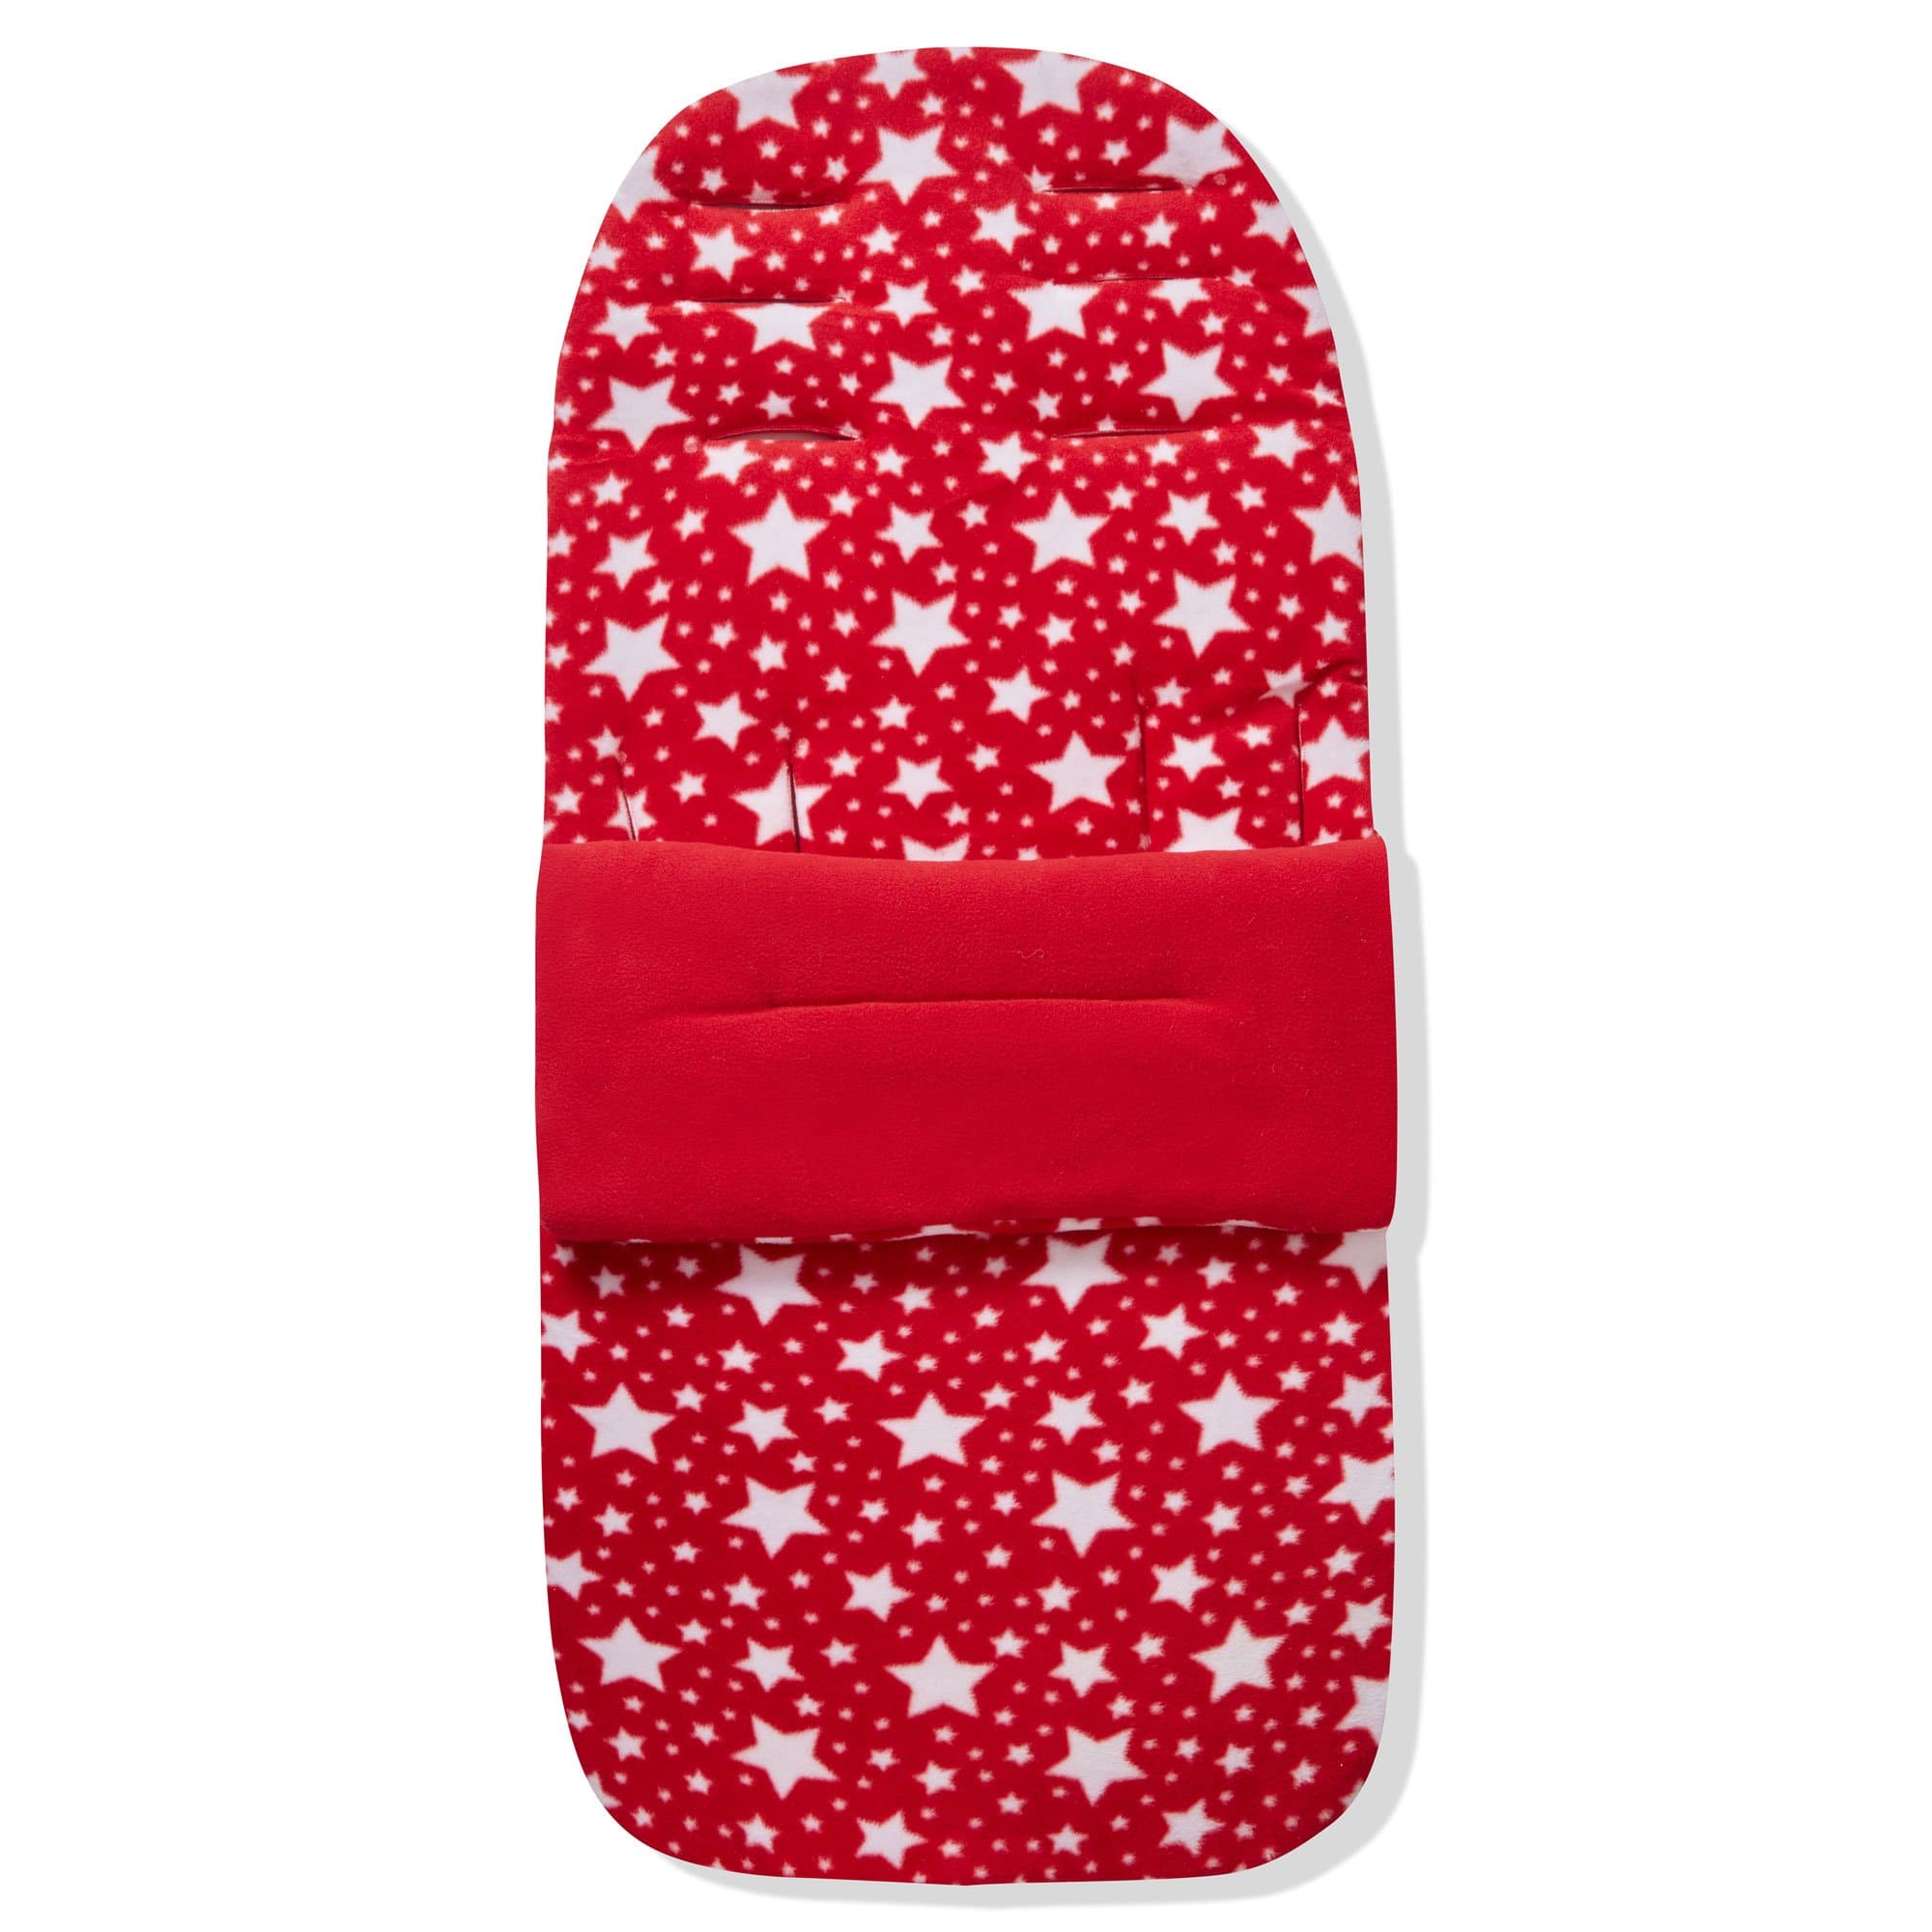 Fleece Footmuff / Cosy Toes Compatible with Ickle Bubba - For Your Little One